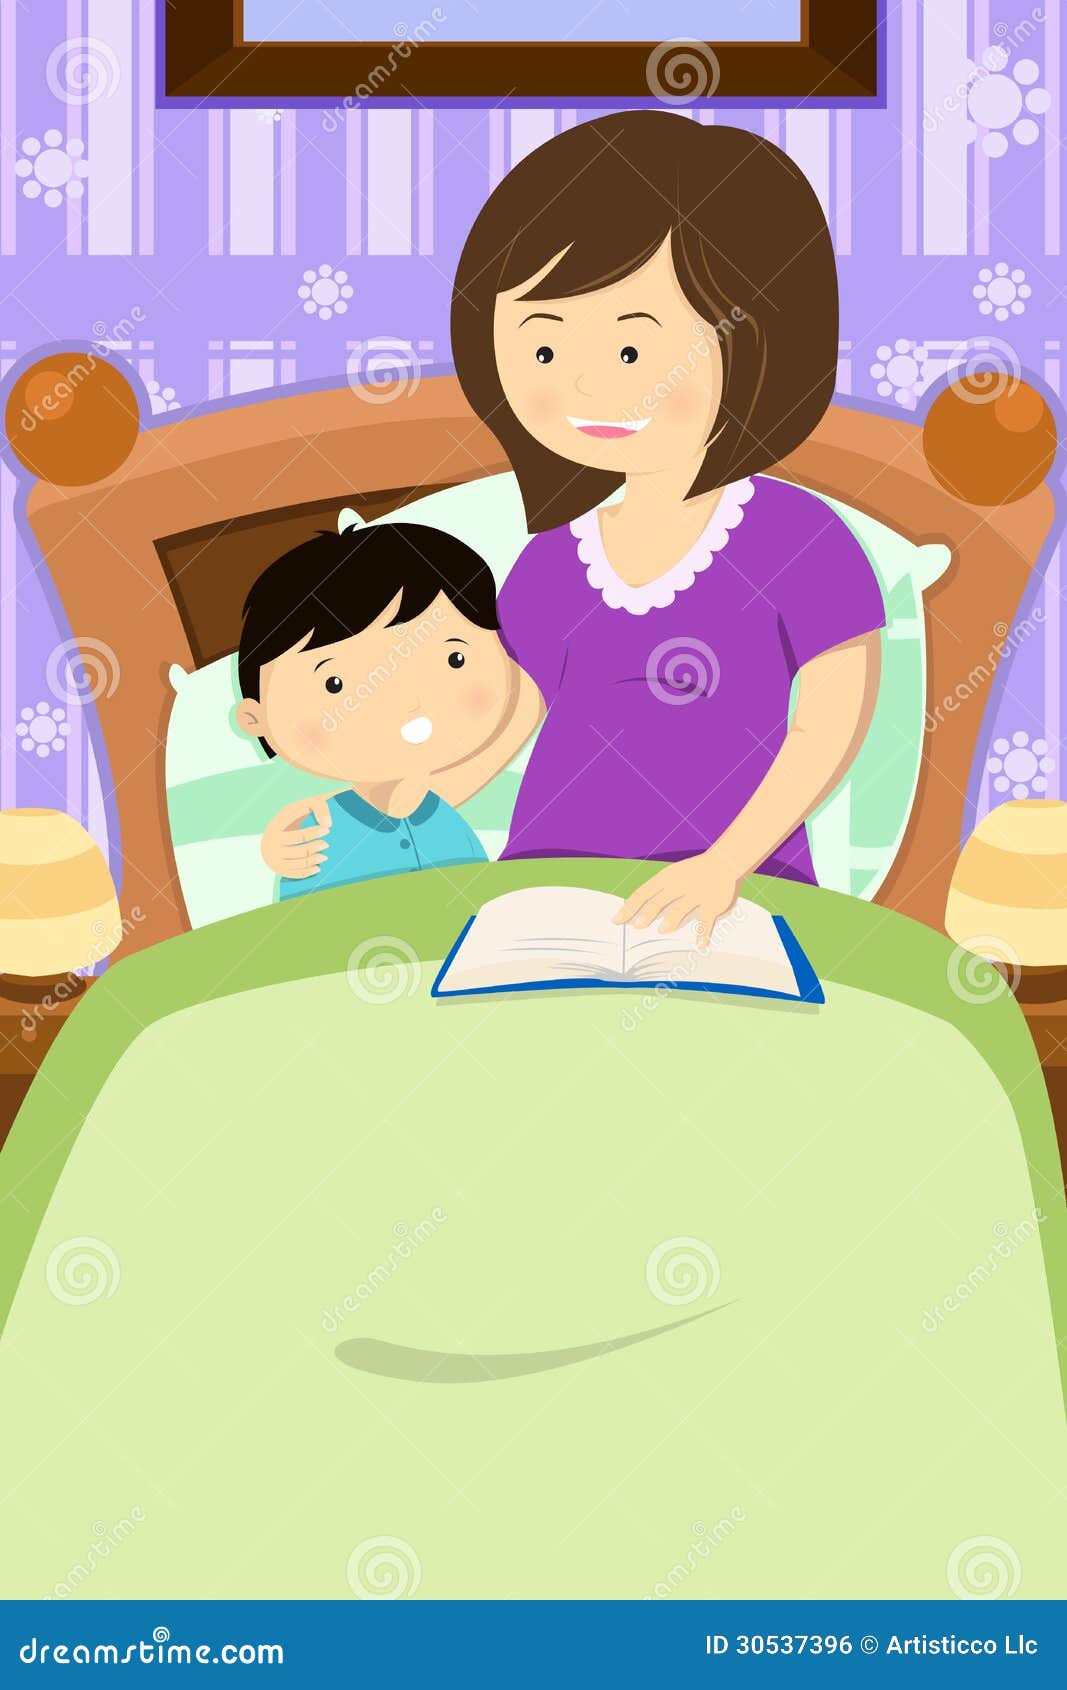 mother reading clipart - photo #19